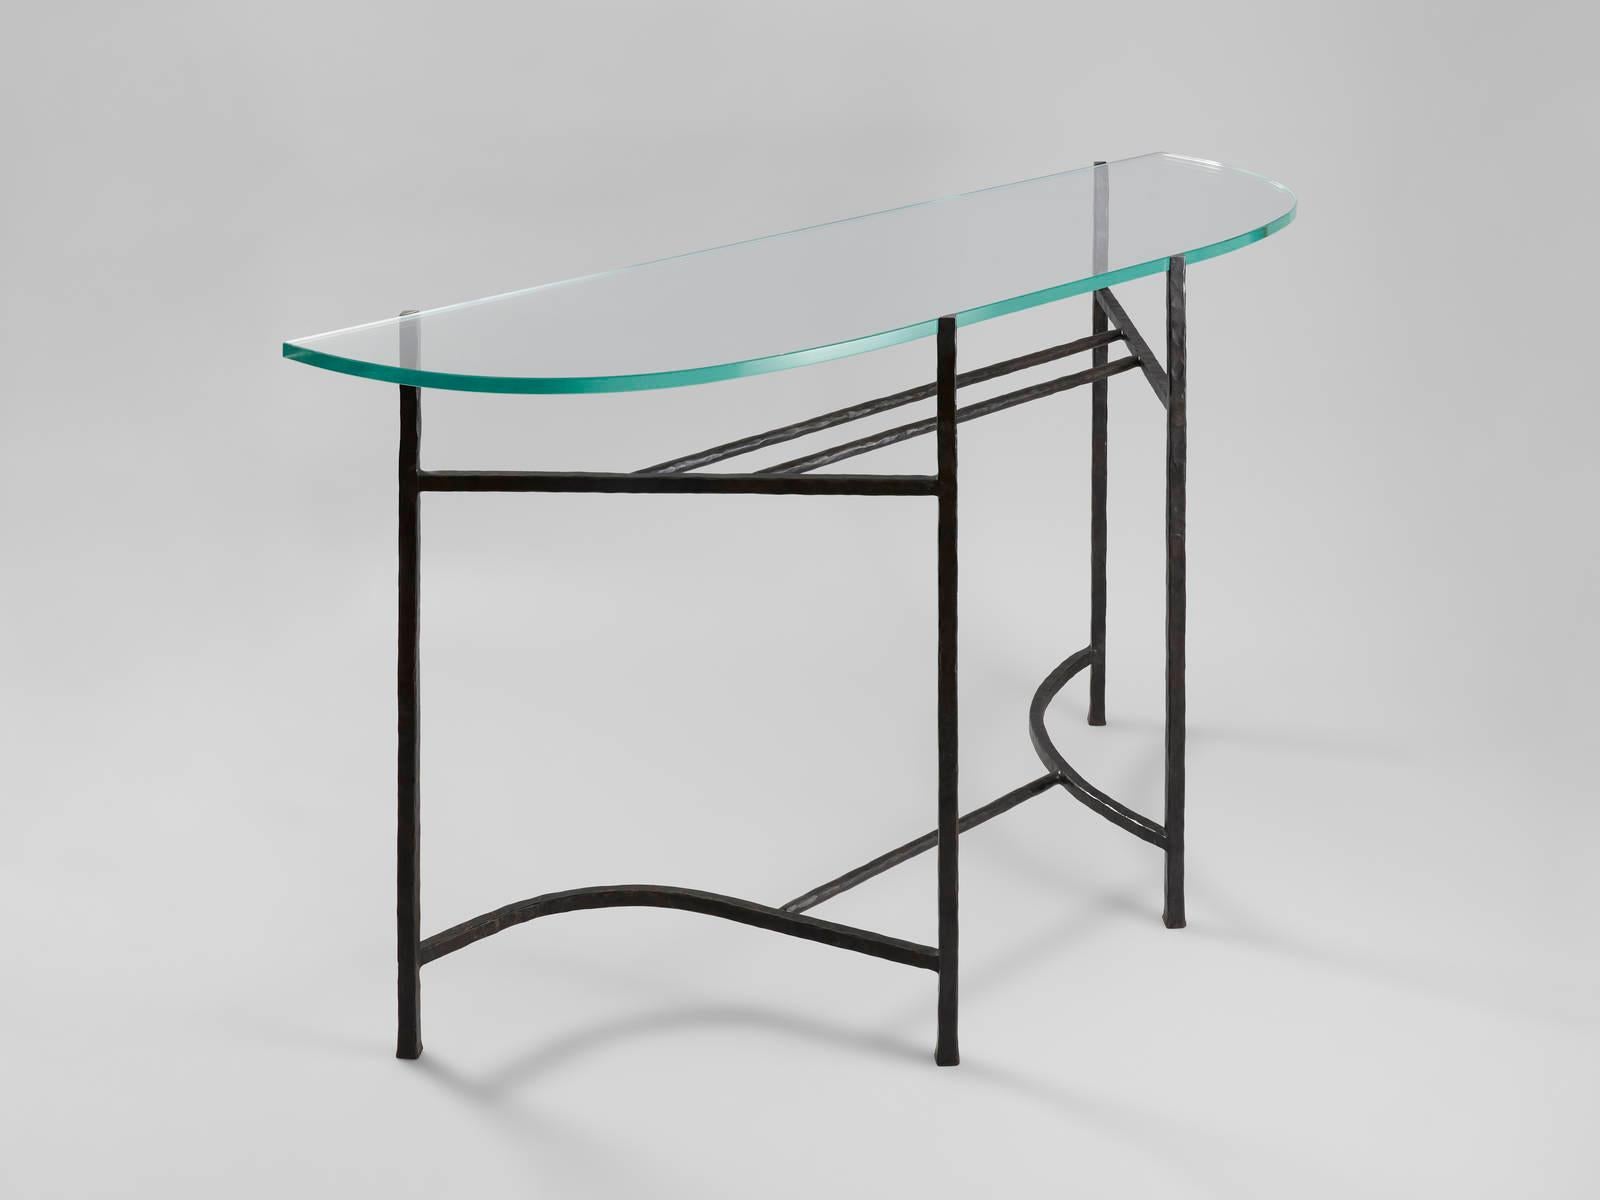 Console
Hand wrought and beaten iron, glass
Measures: H 35.4 x L 63.0 x W 18.9 in
Limited edition of 8 + 4 AP
 